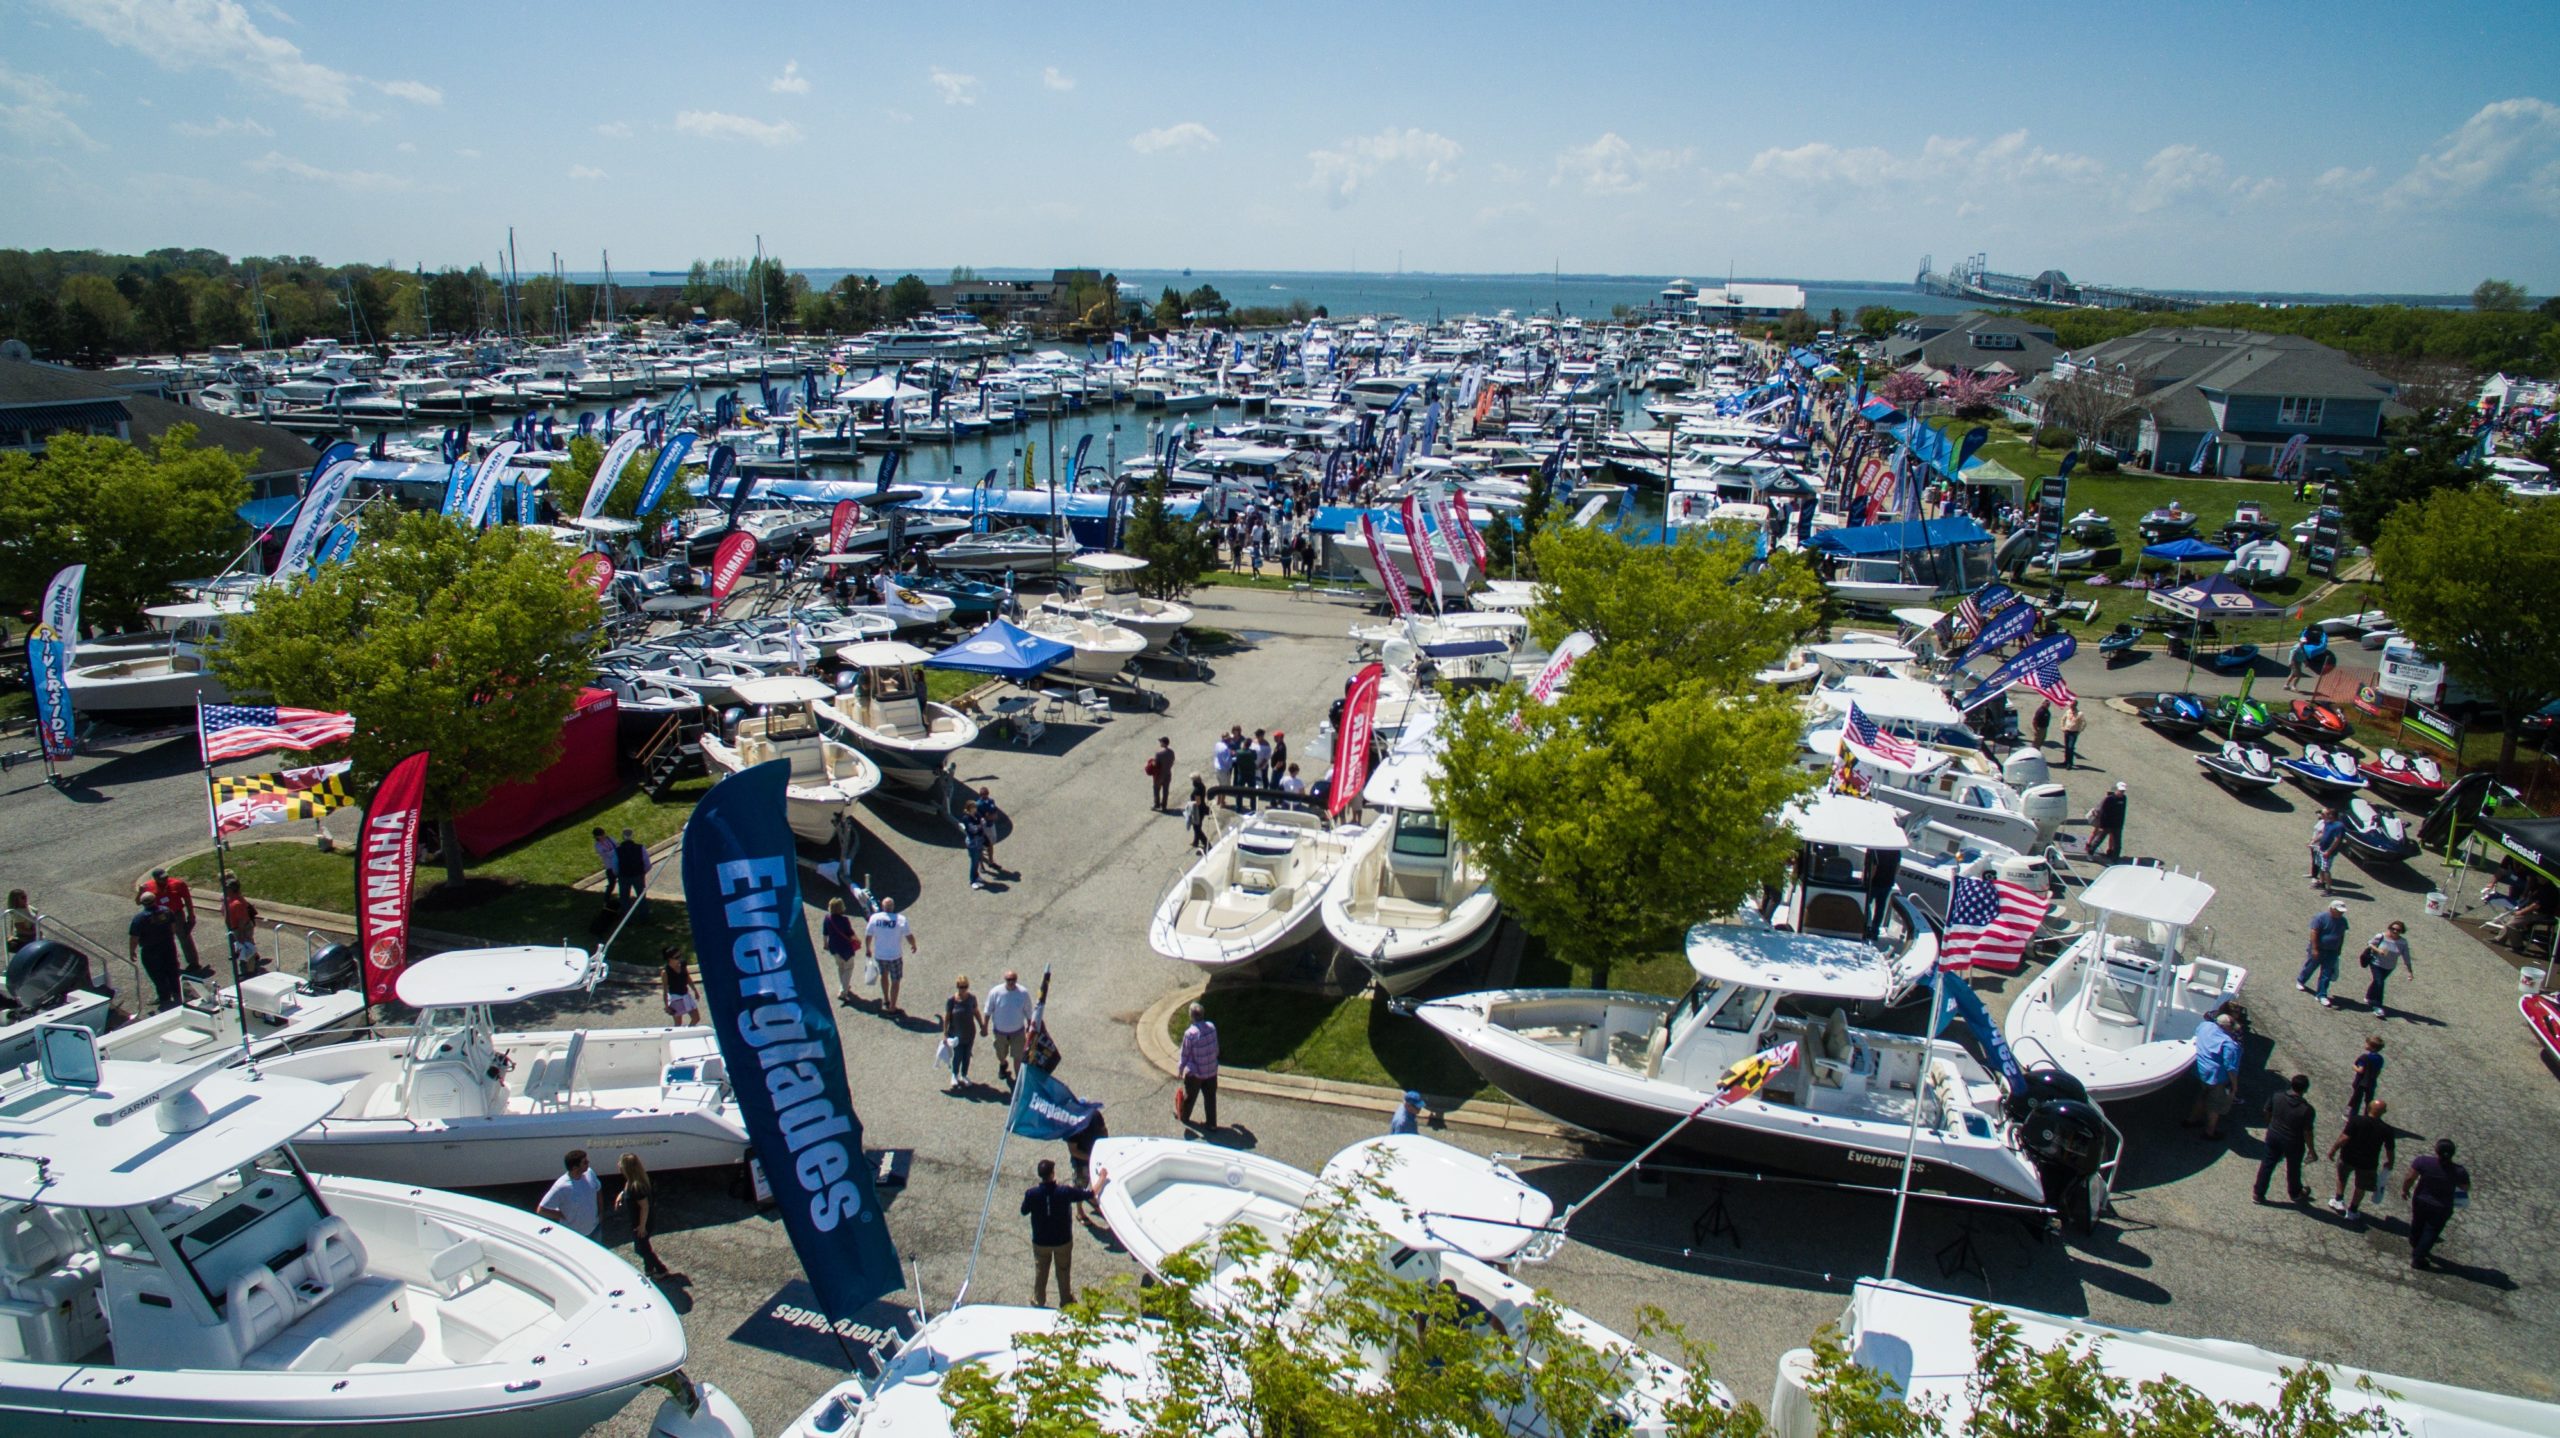 Bay Bridge Boat Show announces expanded format Boating Industry